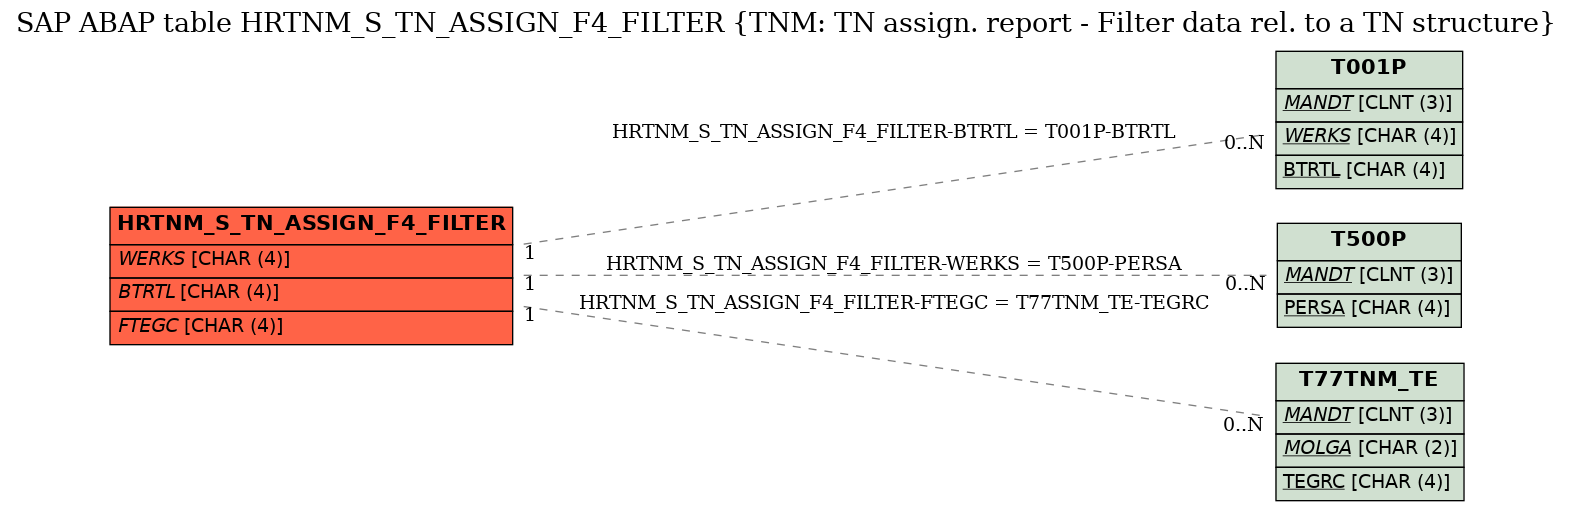 E-R Diagram for table HRTNM_S_TN_ASSIGN_F4_FILTER (TNM: TN assign. report - Filter data rel. to a TN structure)